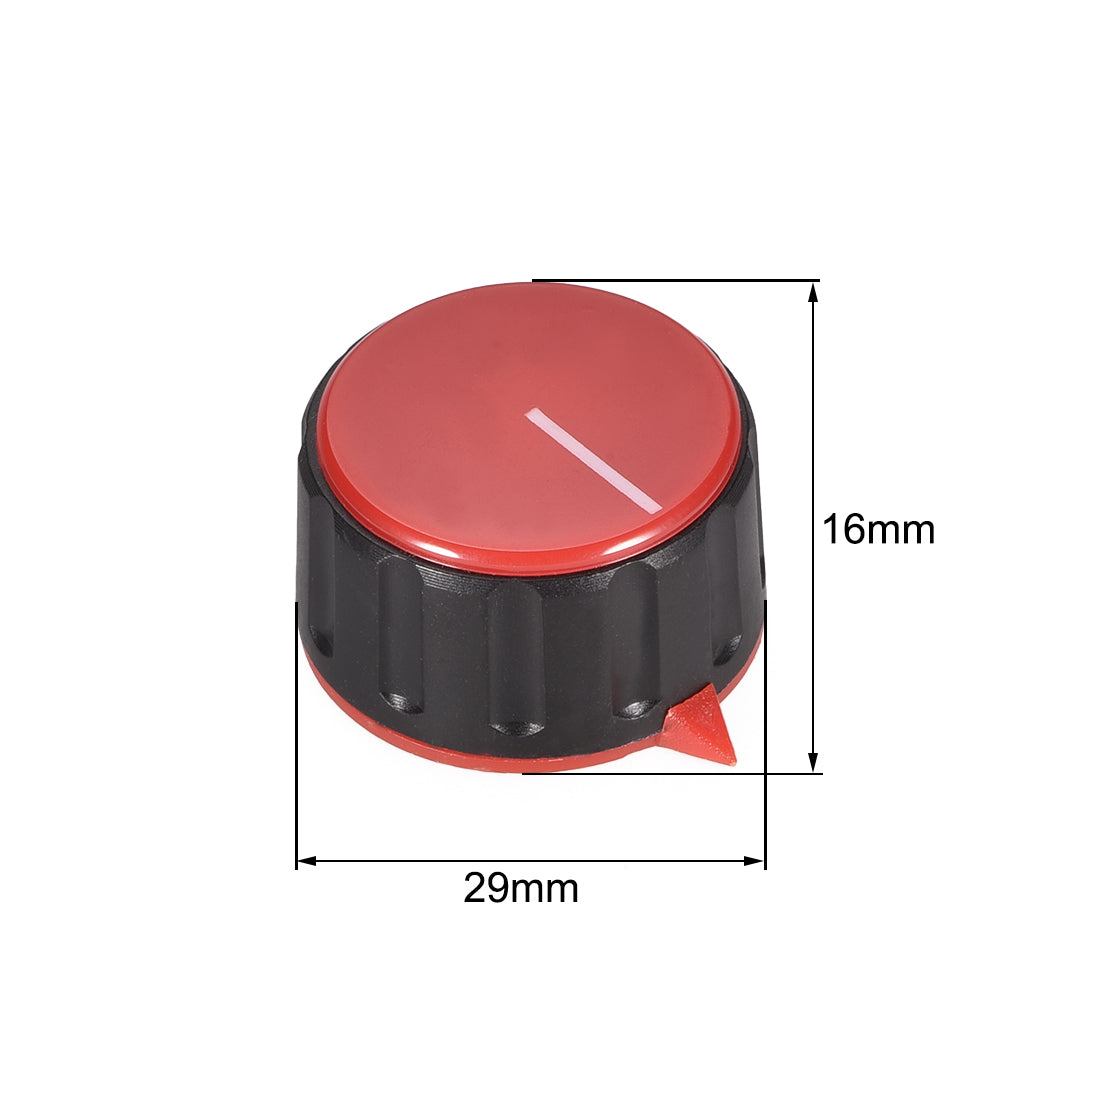 uxcell Uxcell 2pcs 6mm Potentiometer Control Knobs For Electric Guitar Acrylic Volume Tone Knobs Red